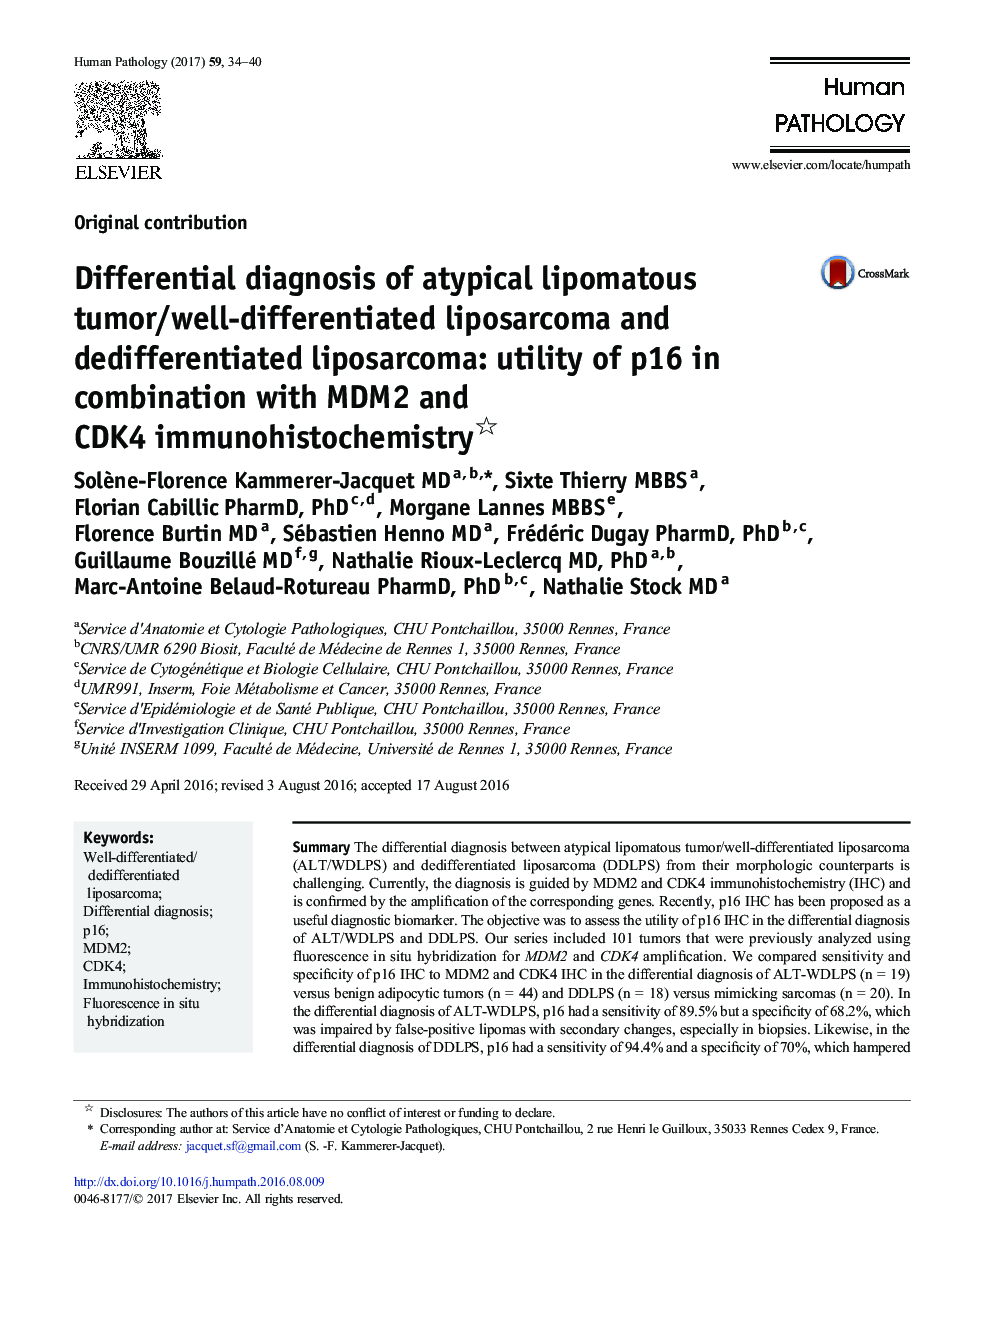 Differential diagnosis of atypical lipomatous tumor/well-differentiated liposarcoma and dedifferentiated liposarcoma: utility of p16 in combination with MDM2 and CDK4 immunohistochemistry